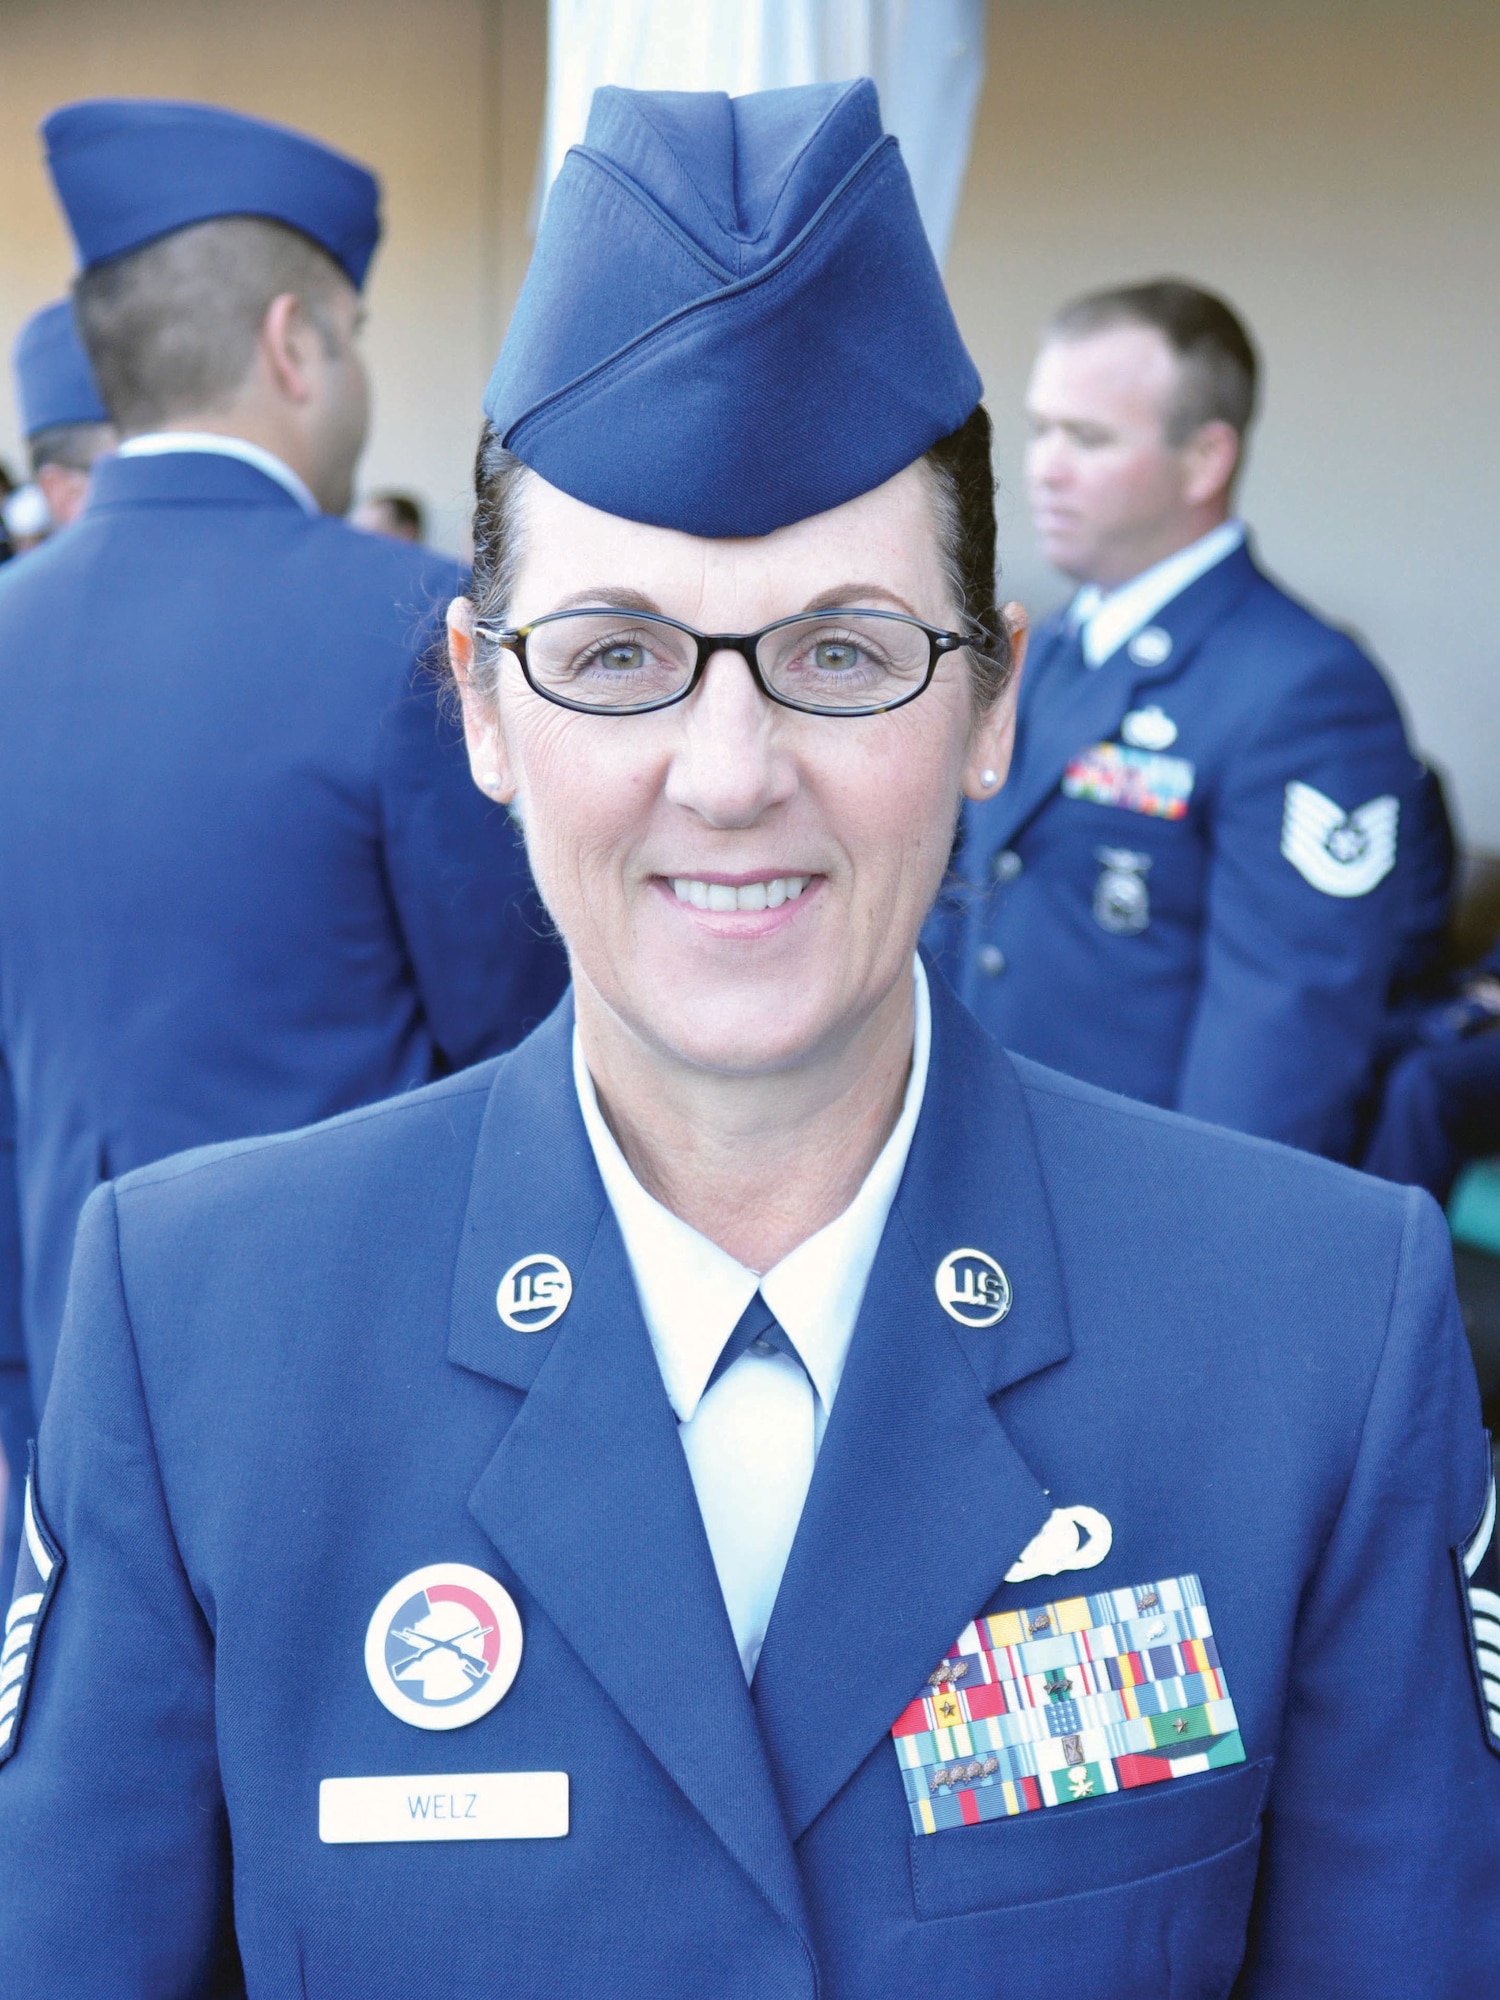 Master Sgt. Linda E. Welz, 452 Air Mobilitly Wing Public Affairs Superintendent.  (U.S. Air Force photo/Valerie Palacios)